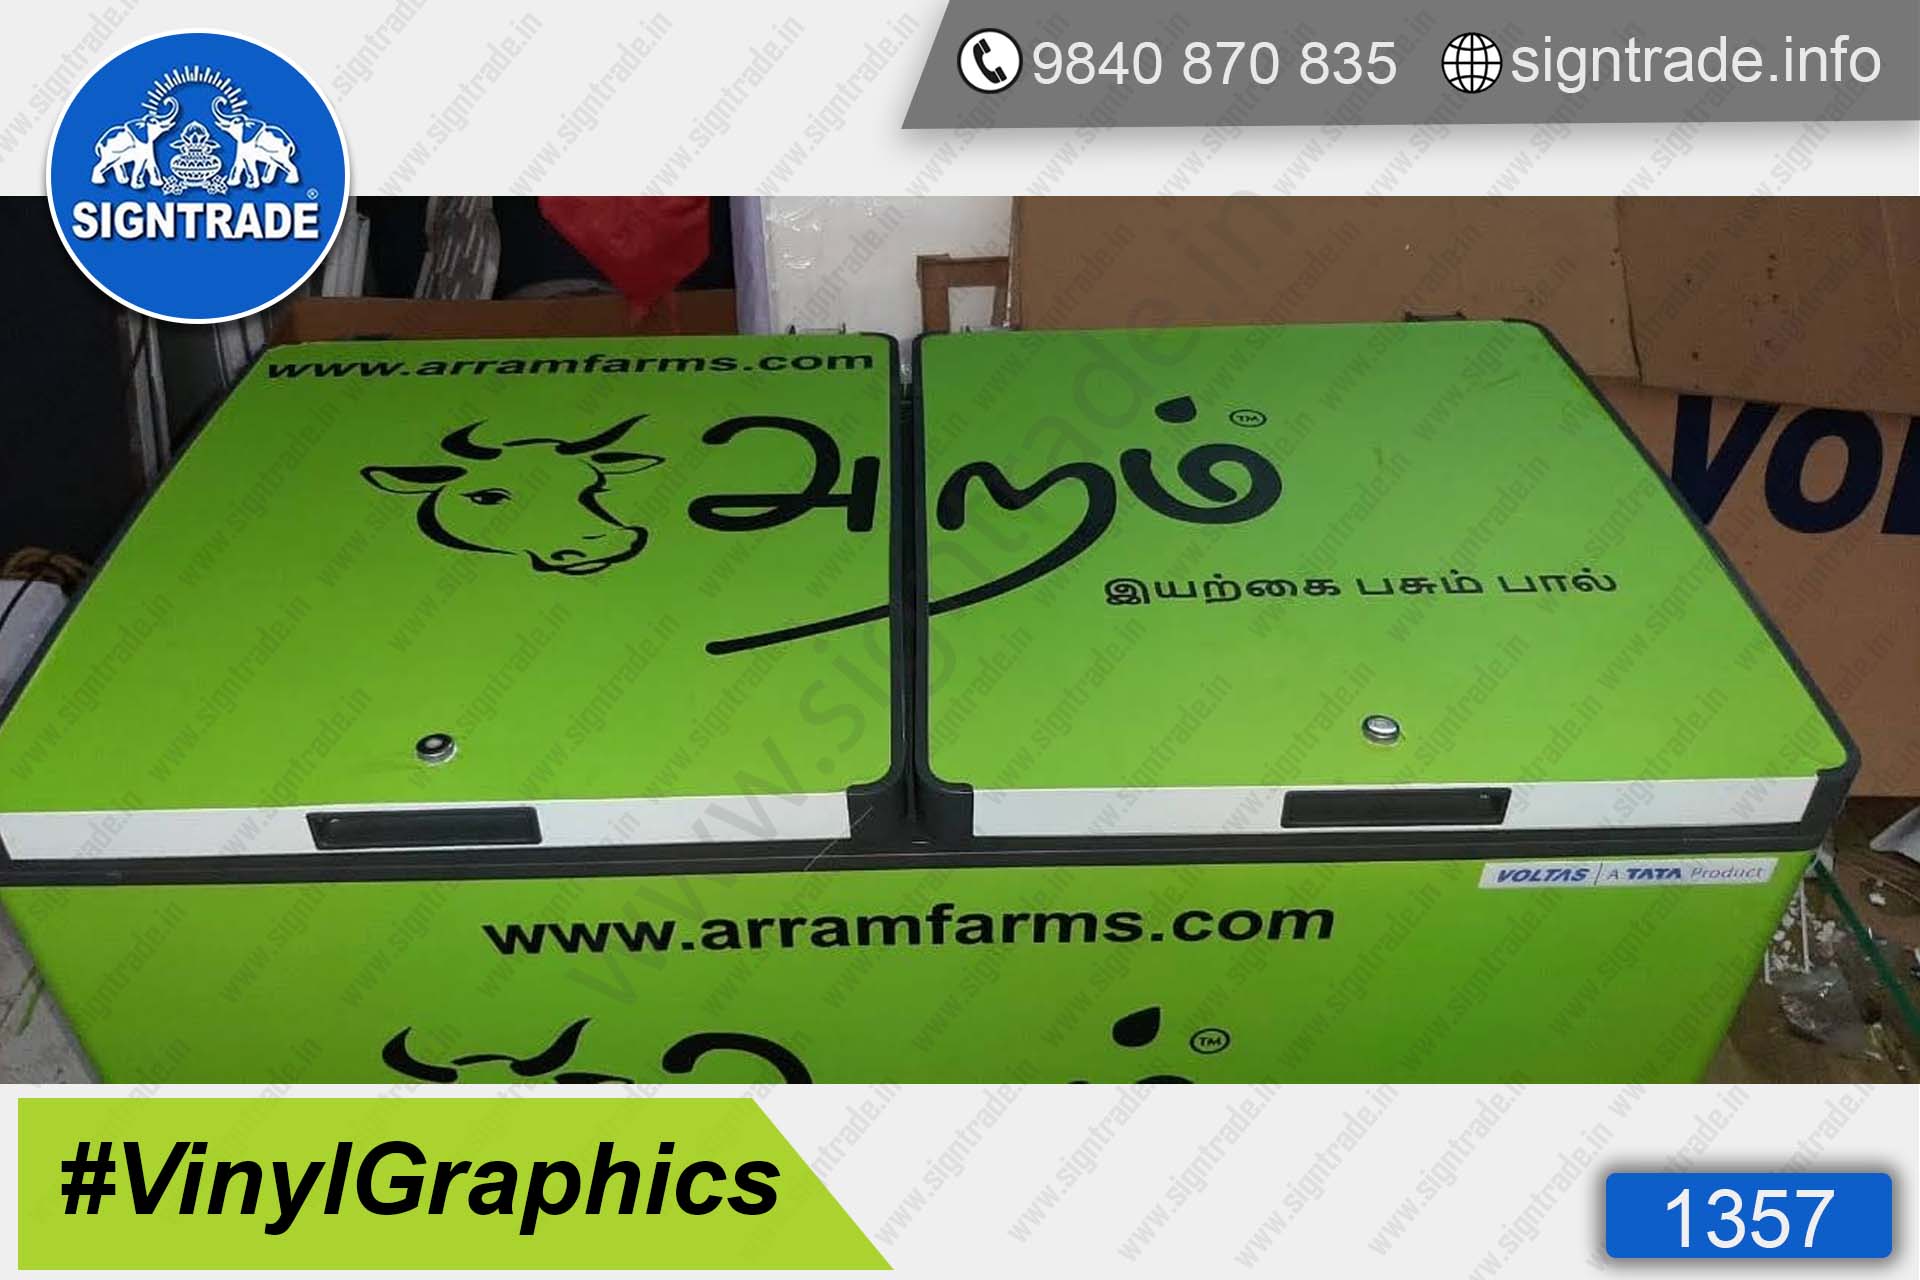 Arram Farms - Natural Cow Milk - Chennai - SIGNTRADE - Wall Graphics and Wall Wrapping Service in Chennai